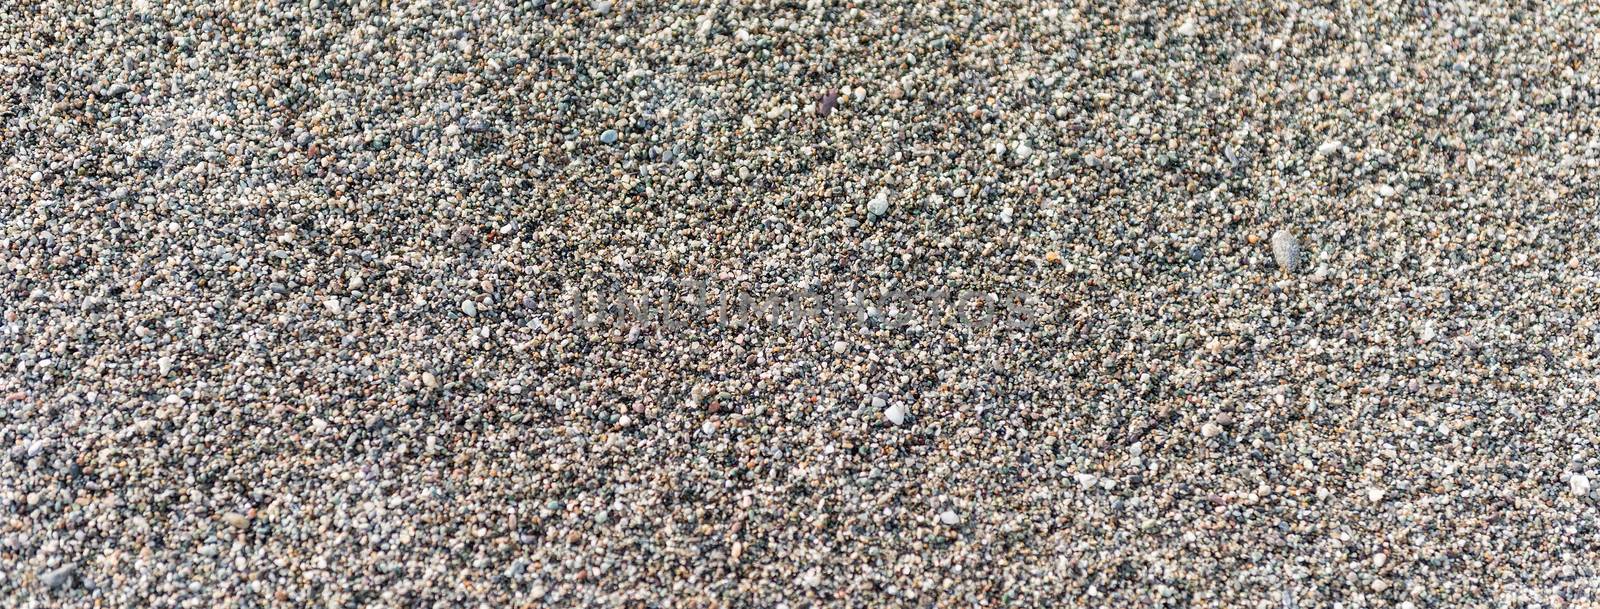 Top view of detailed sand texture on a sandy beach, may be used as background